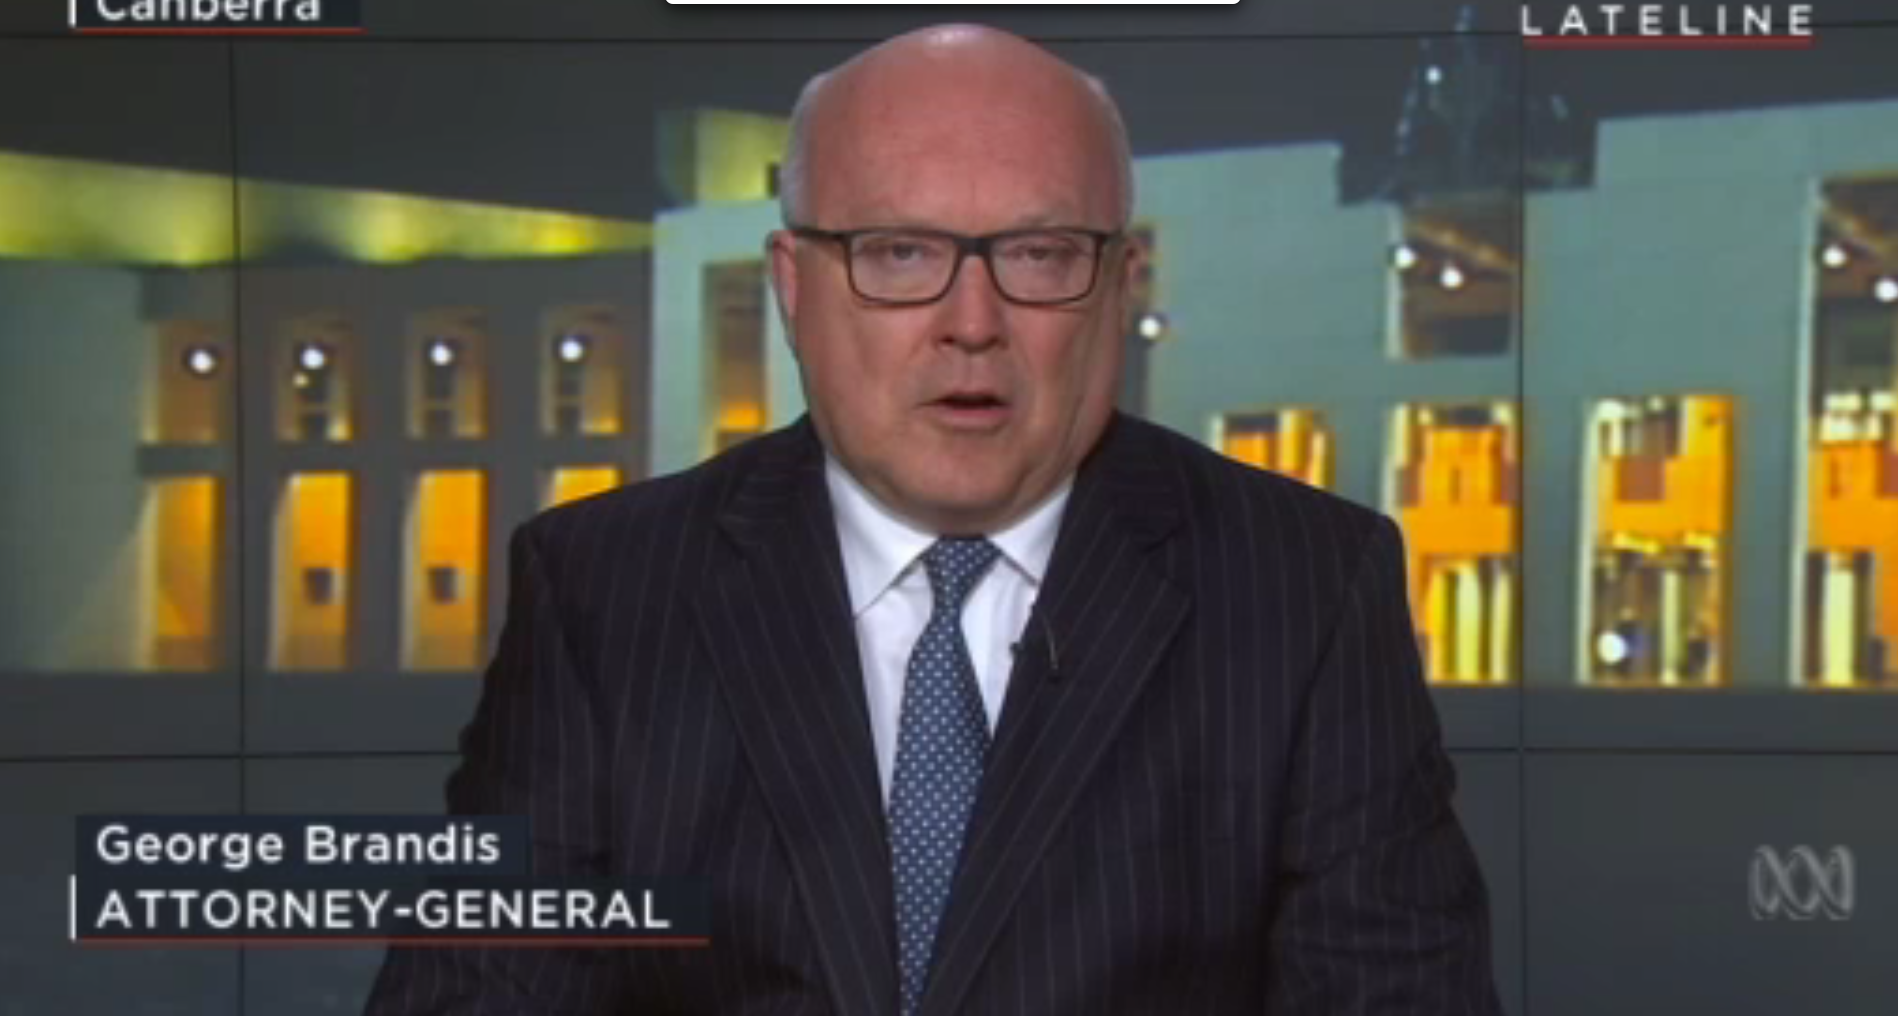 ‘Anybody who thinks marriage equality is inevitable is a fool’ – Brandis